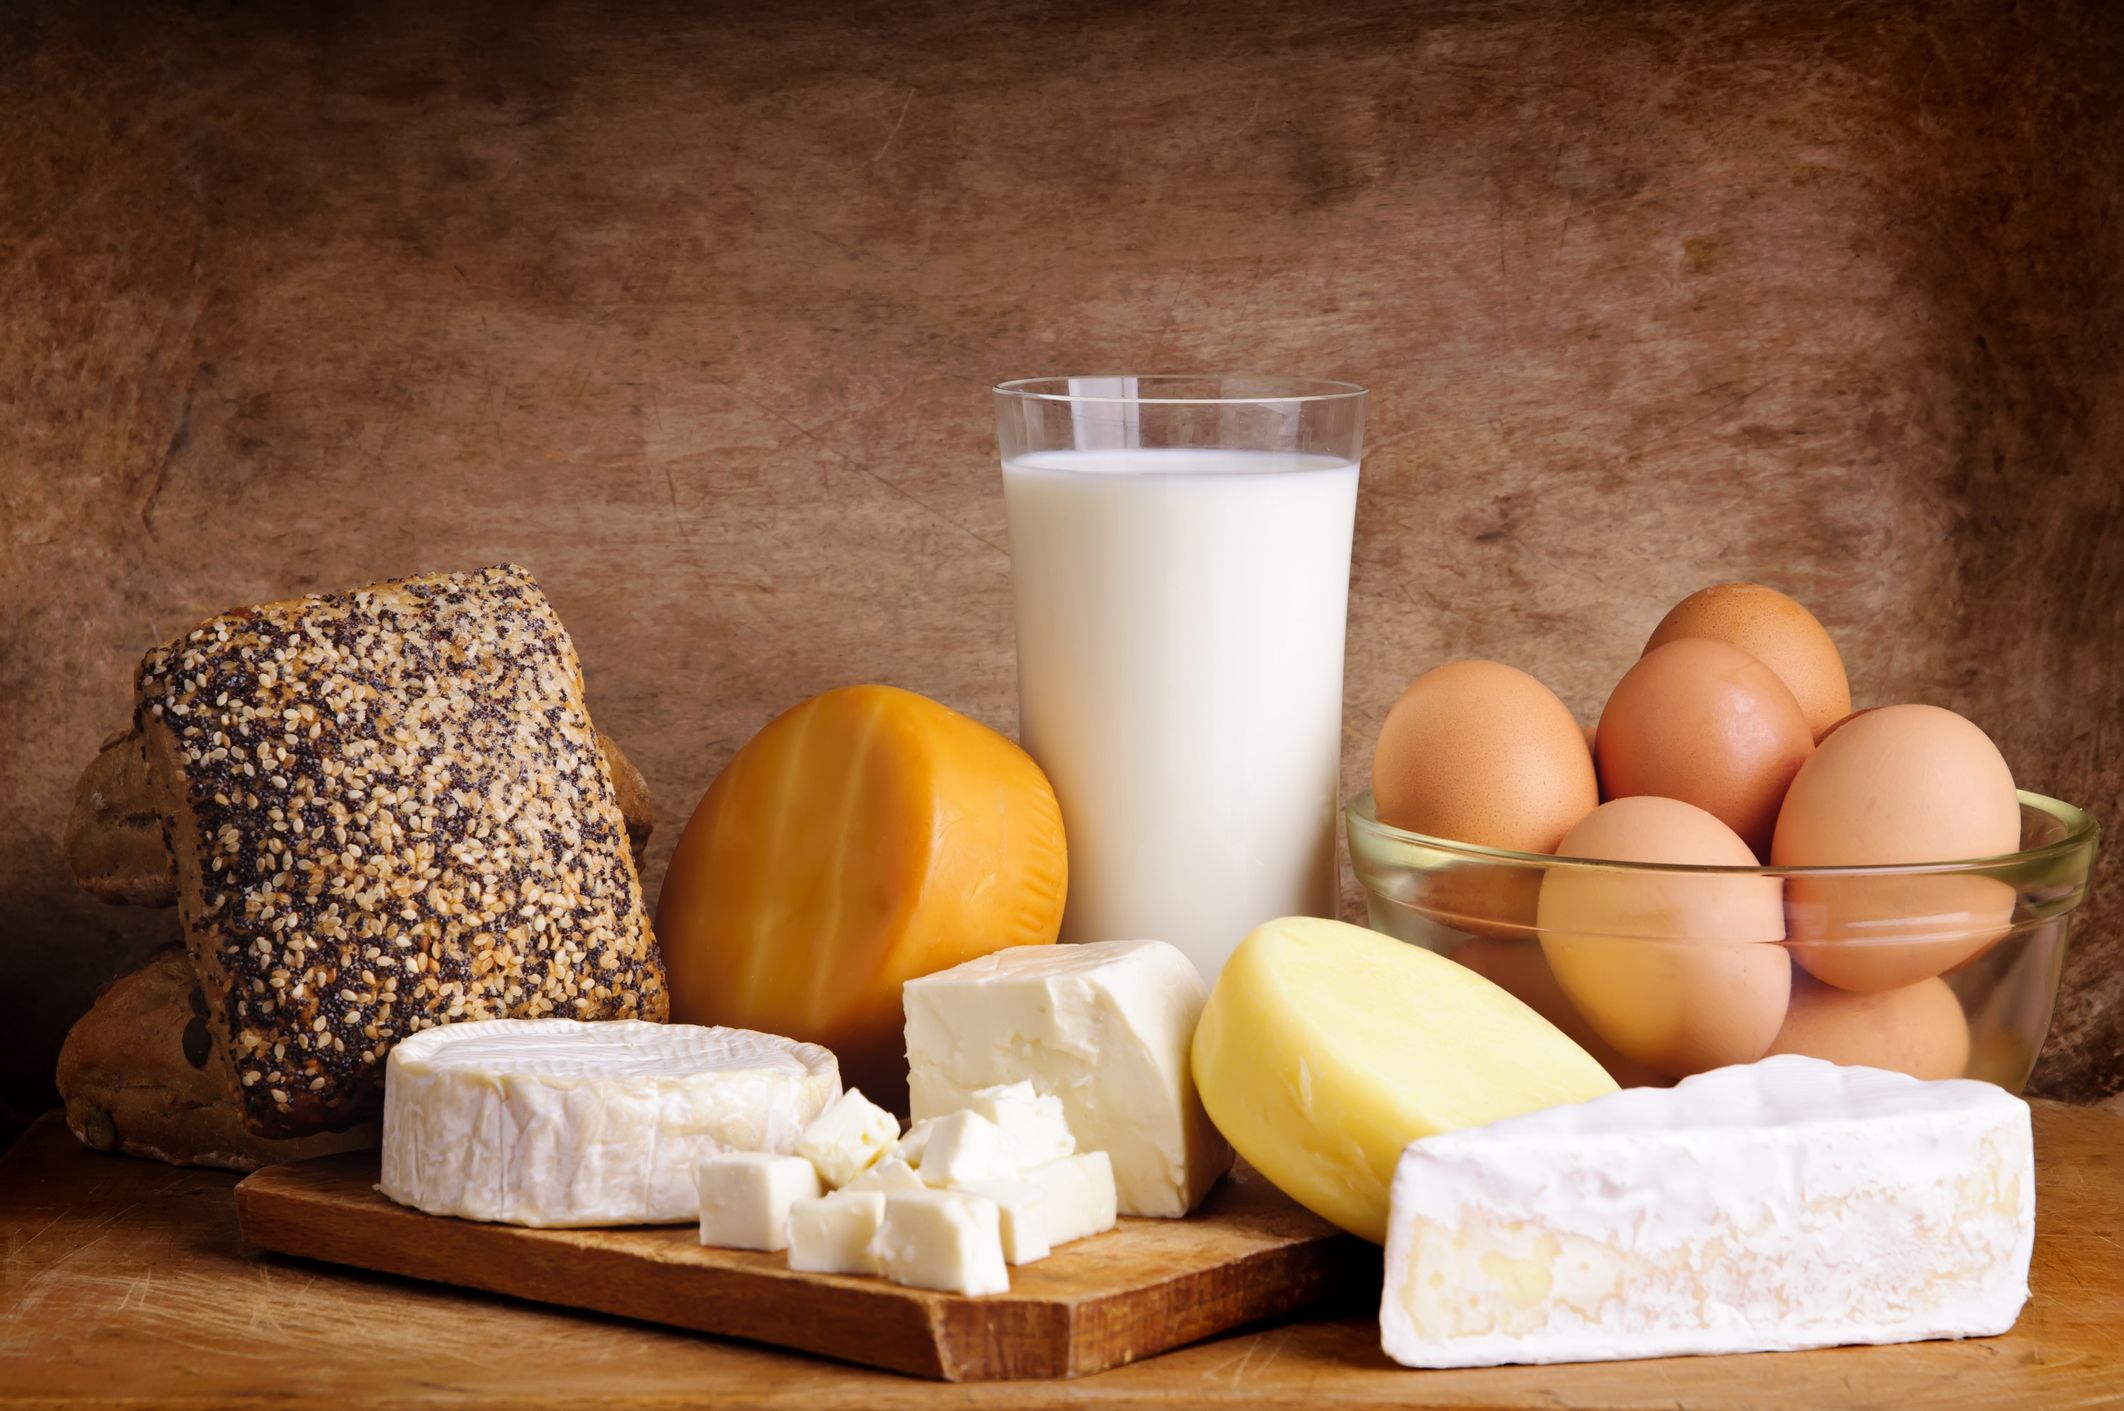 Eggs and Dairy are good dietary sources of vitamin D.